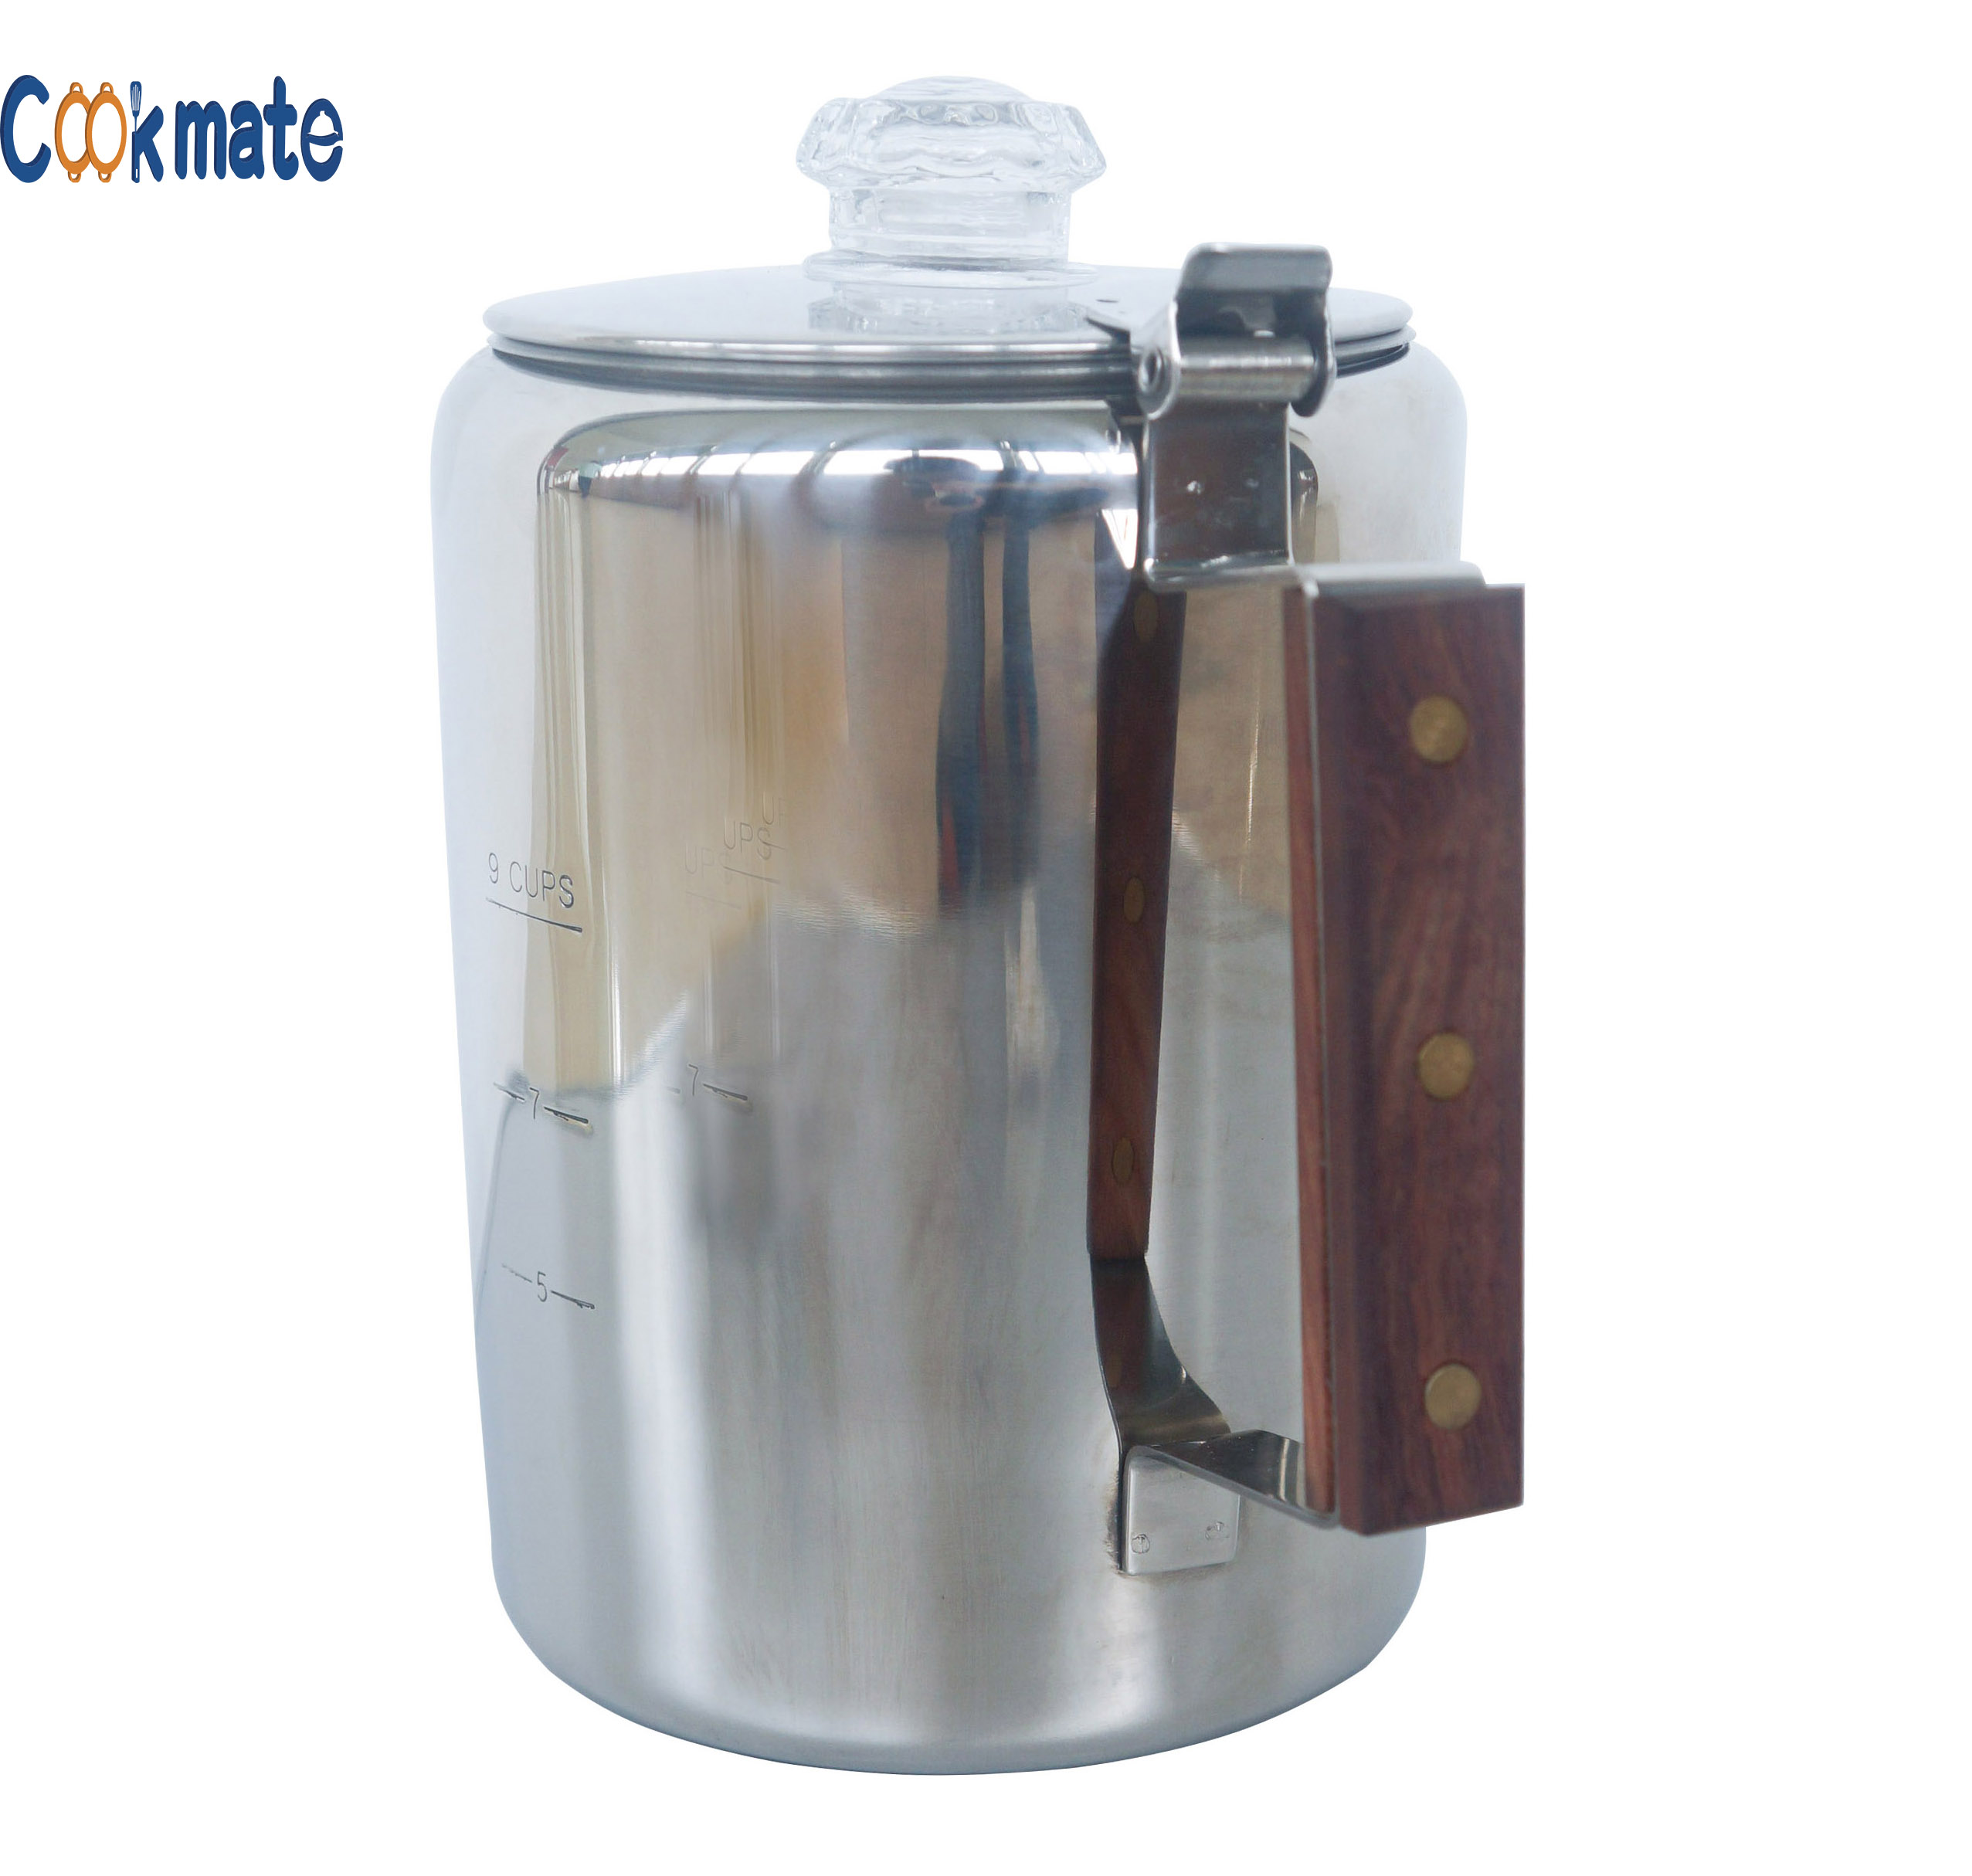 Outdoor Wooden Handle 304 Stainless Steel Camping Teapot Kettle Portable Coffee Percolater Espresso Maker Making